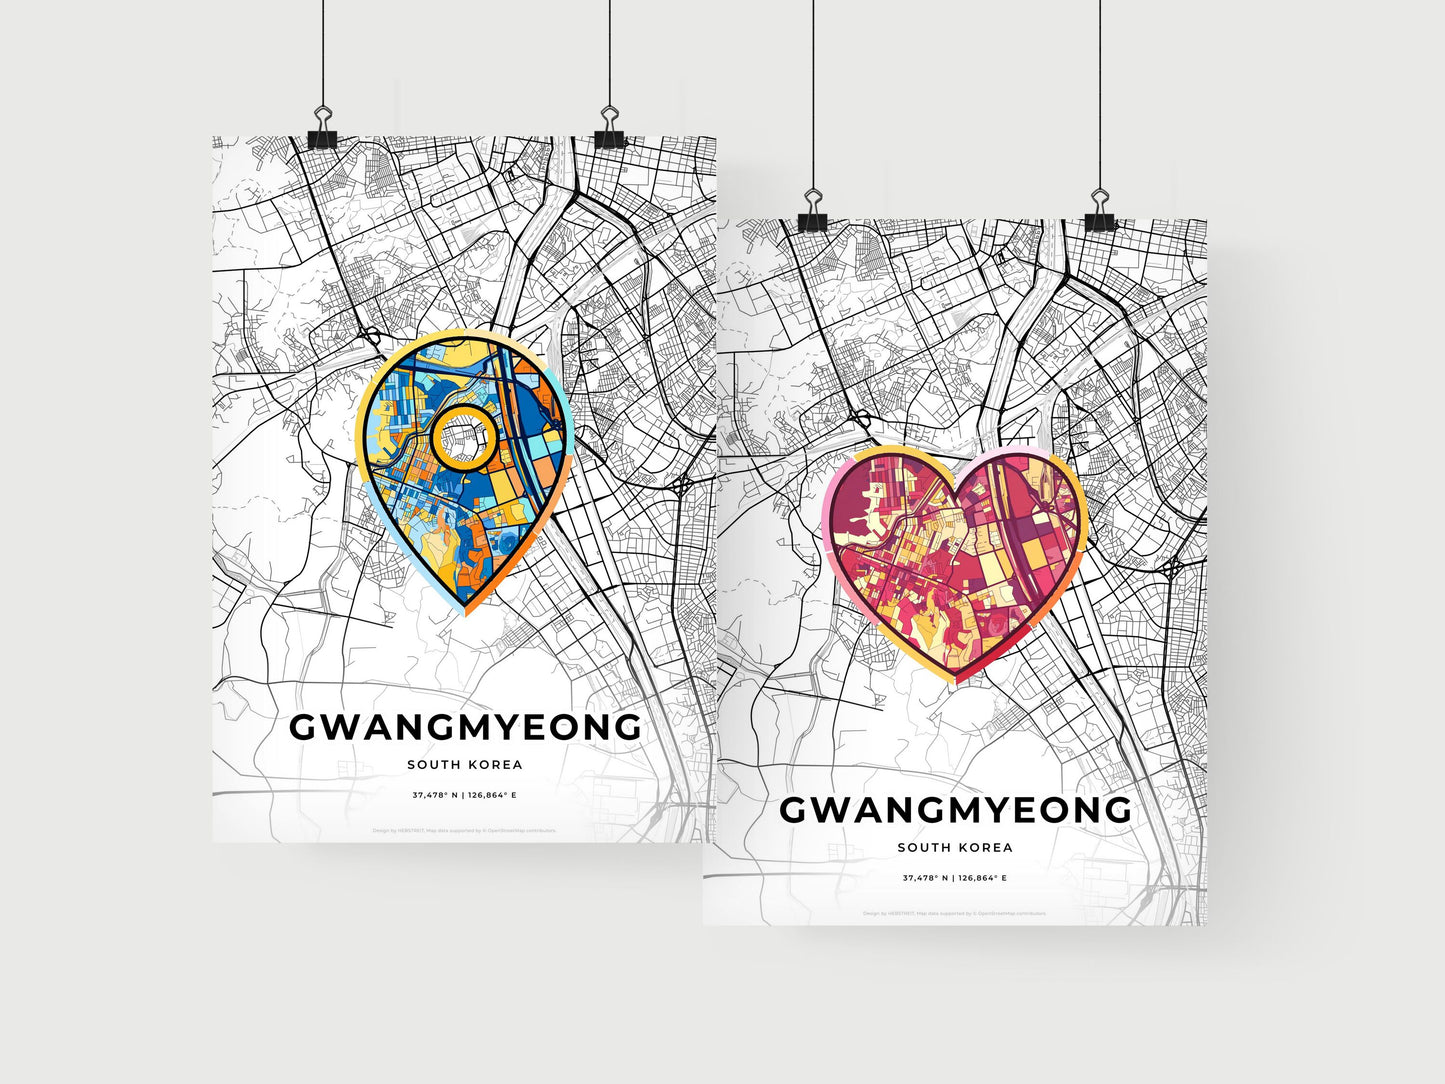 GWANGMYEONG SOUTH KOREA minimal art map with a colorful icon. Where it all began, Couple map gift.